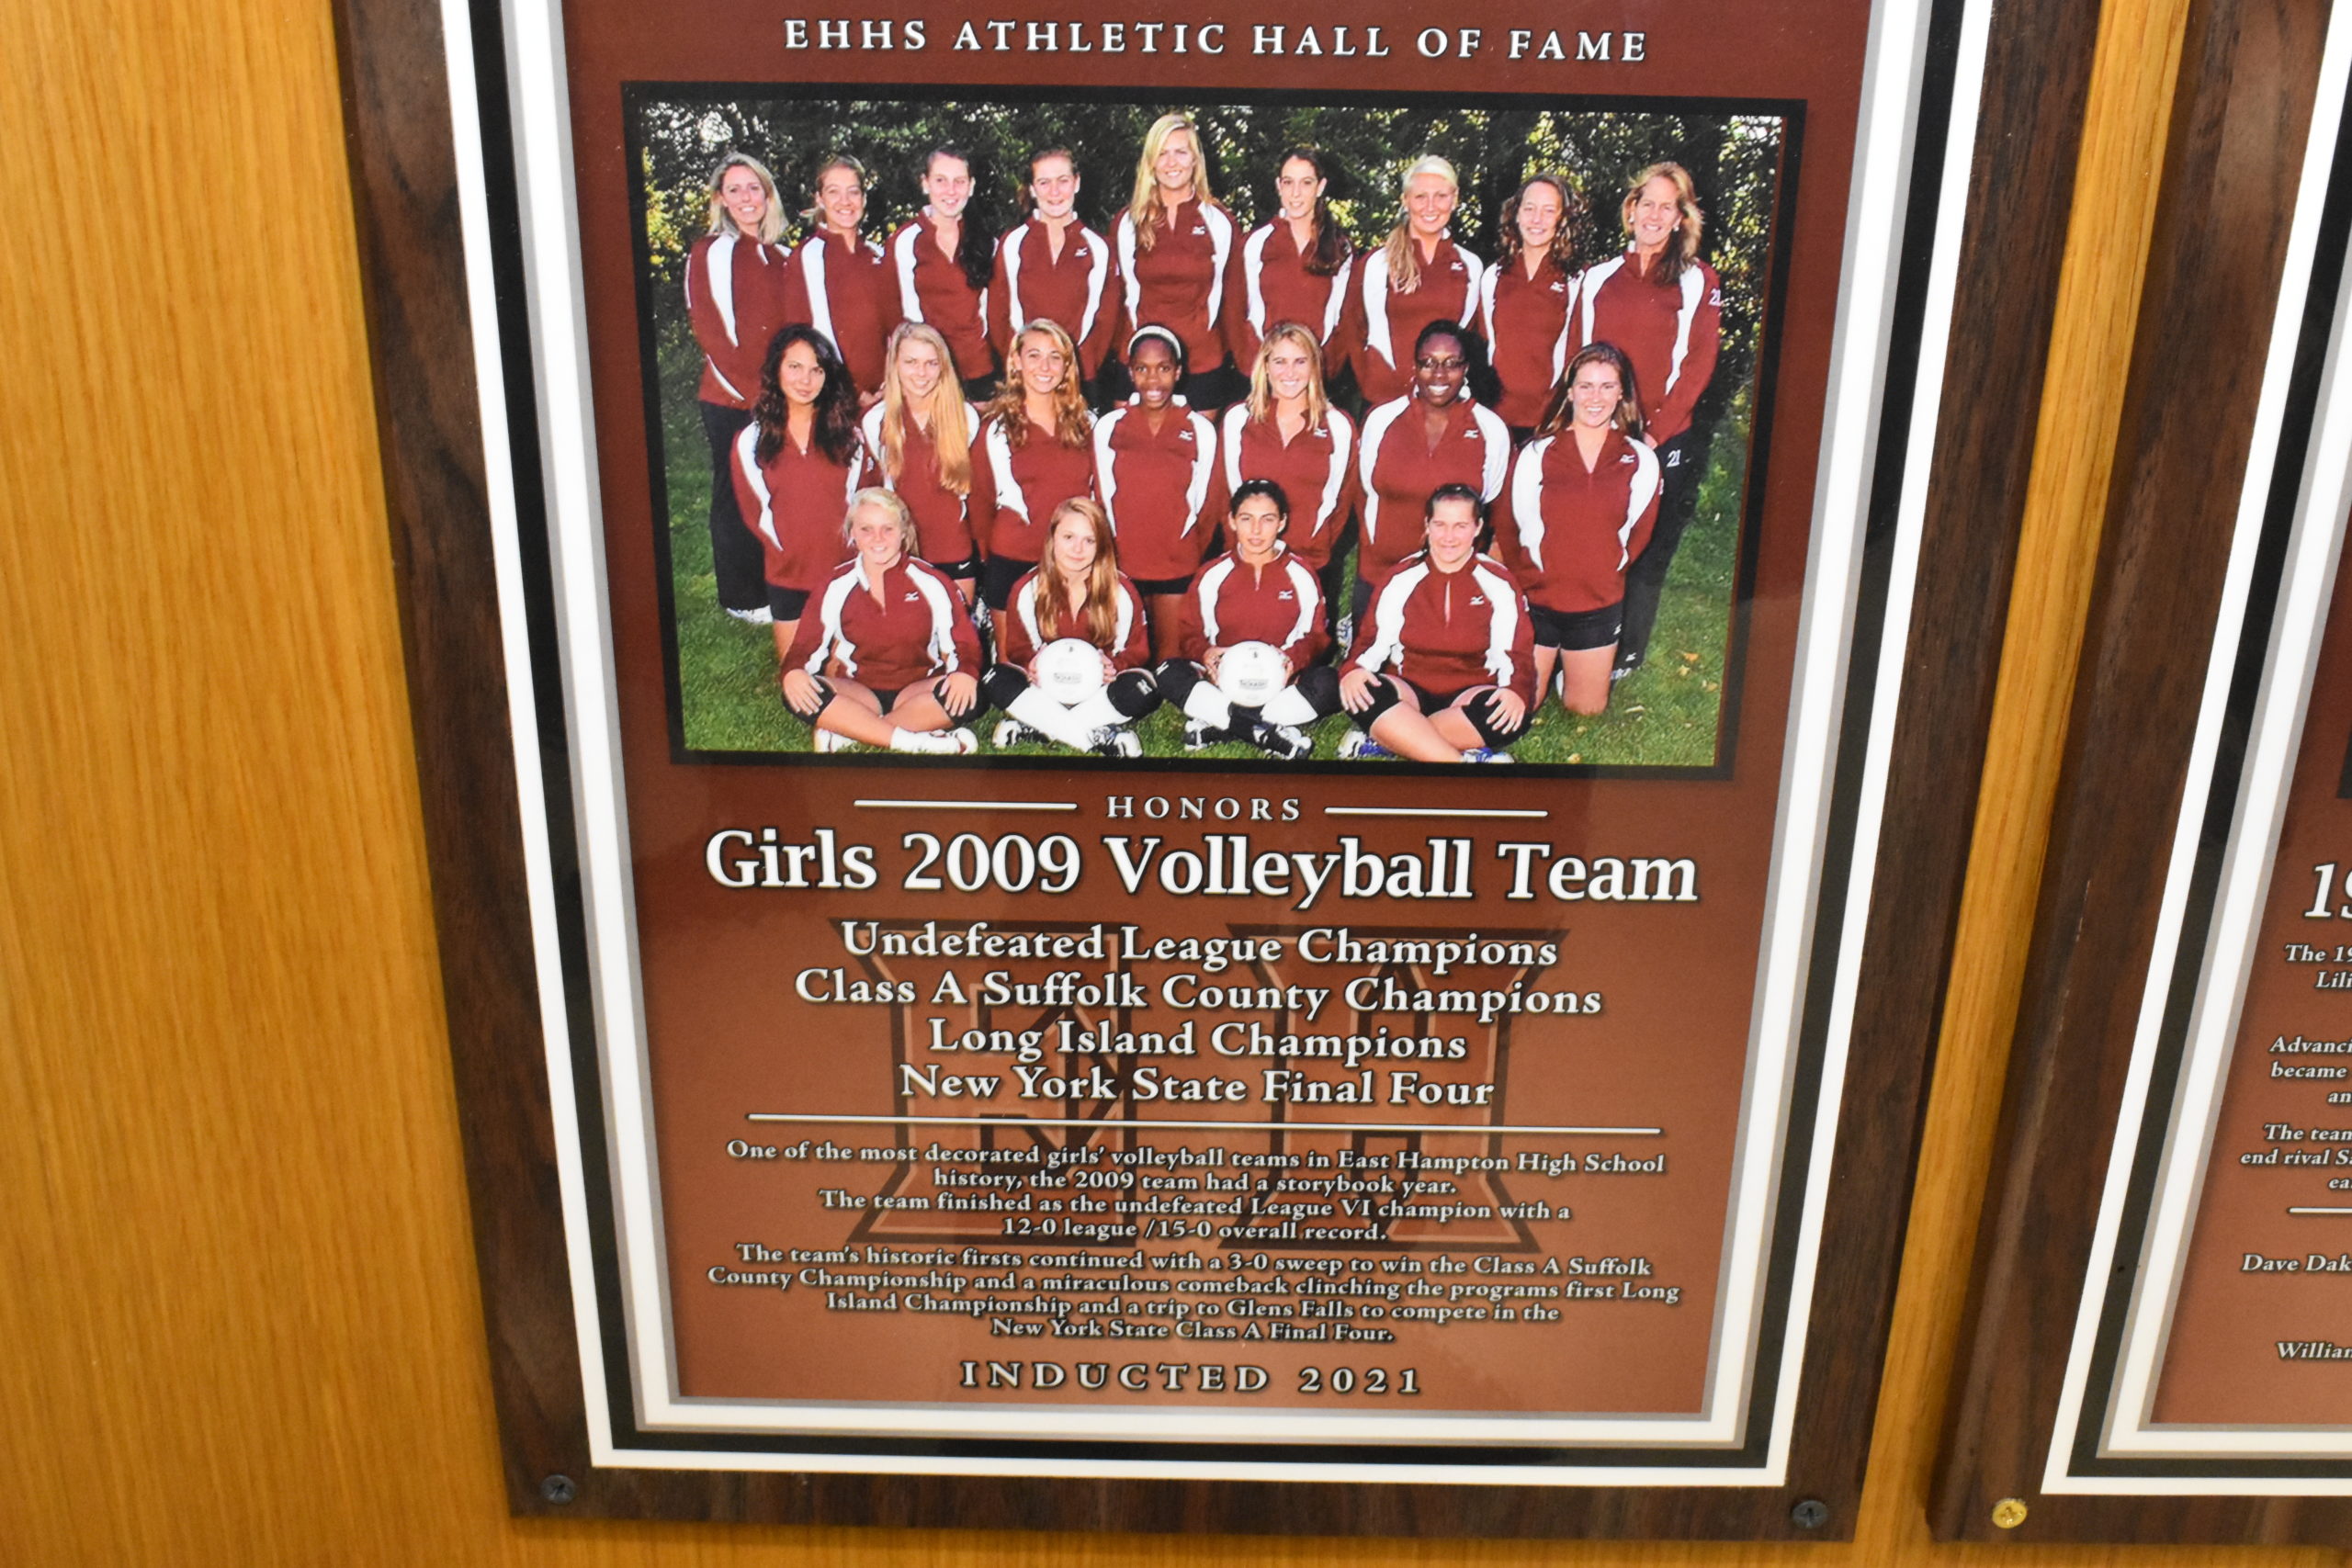 The 2009 girls volleyball team's plaque.